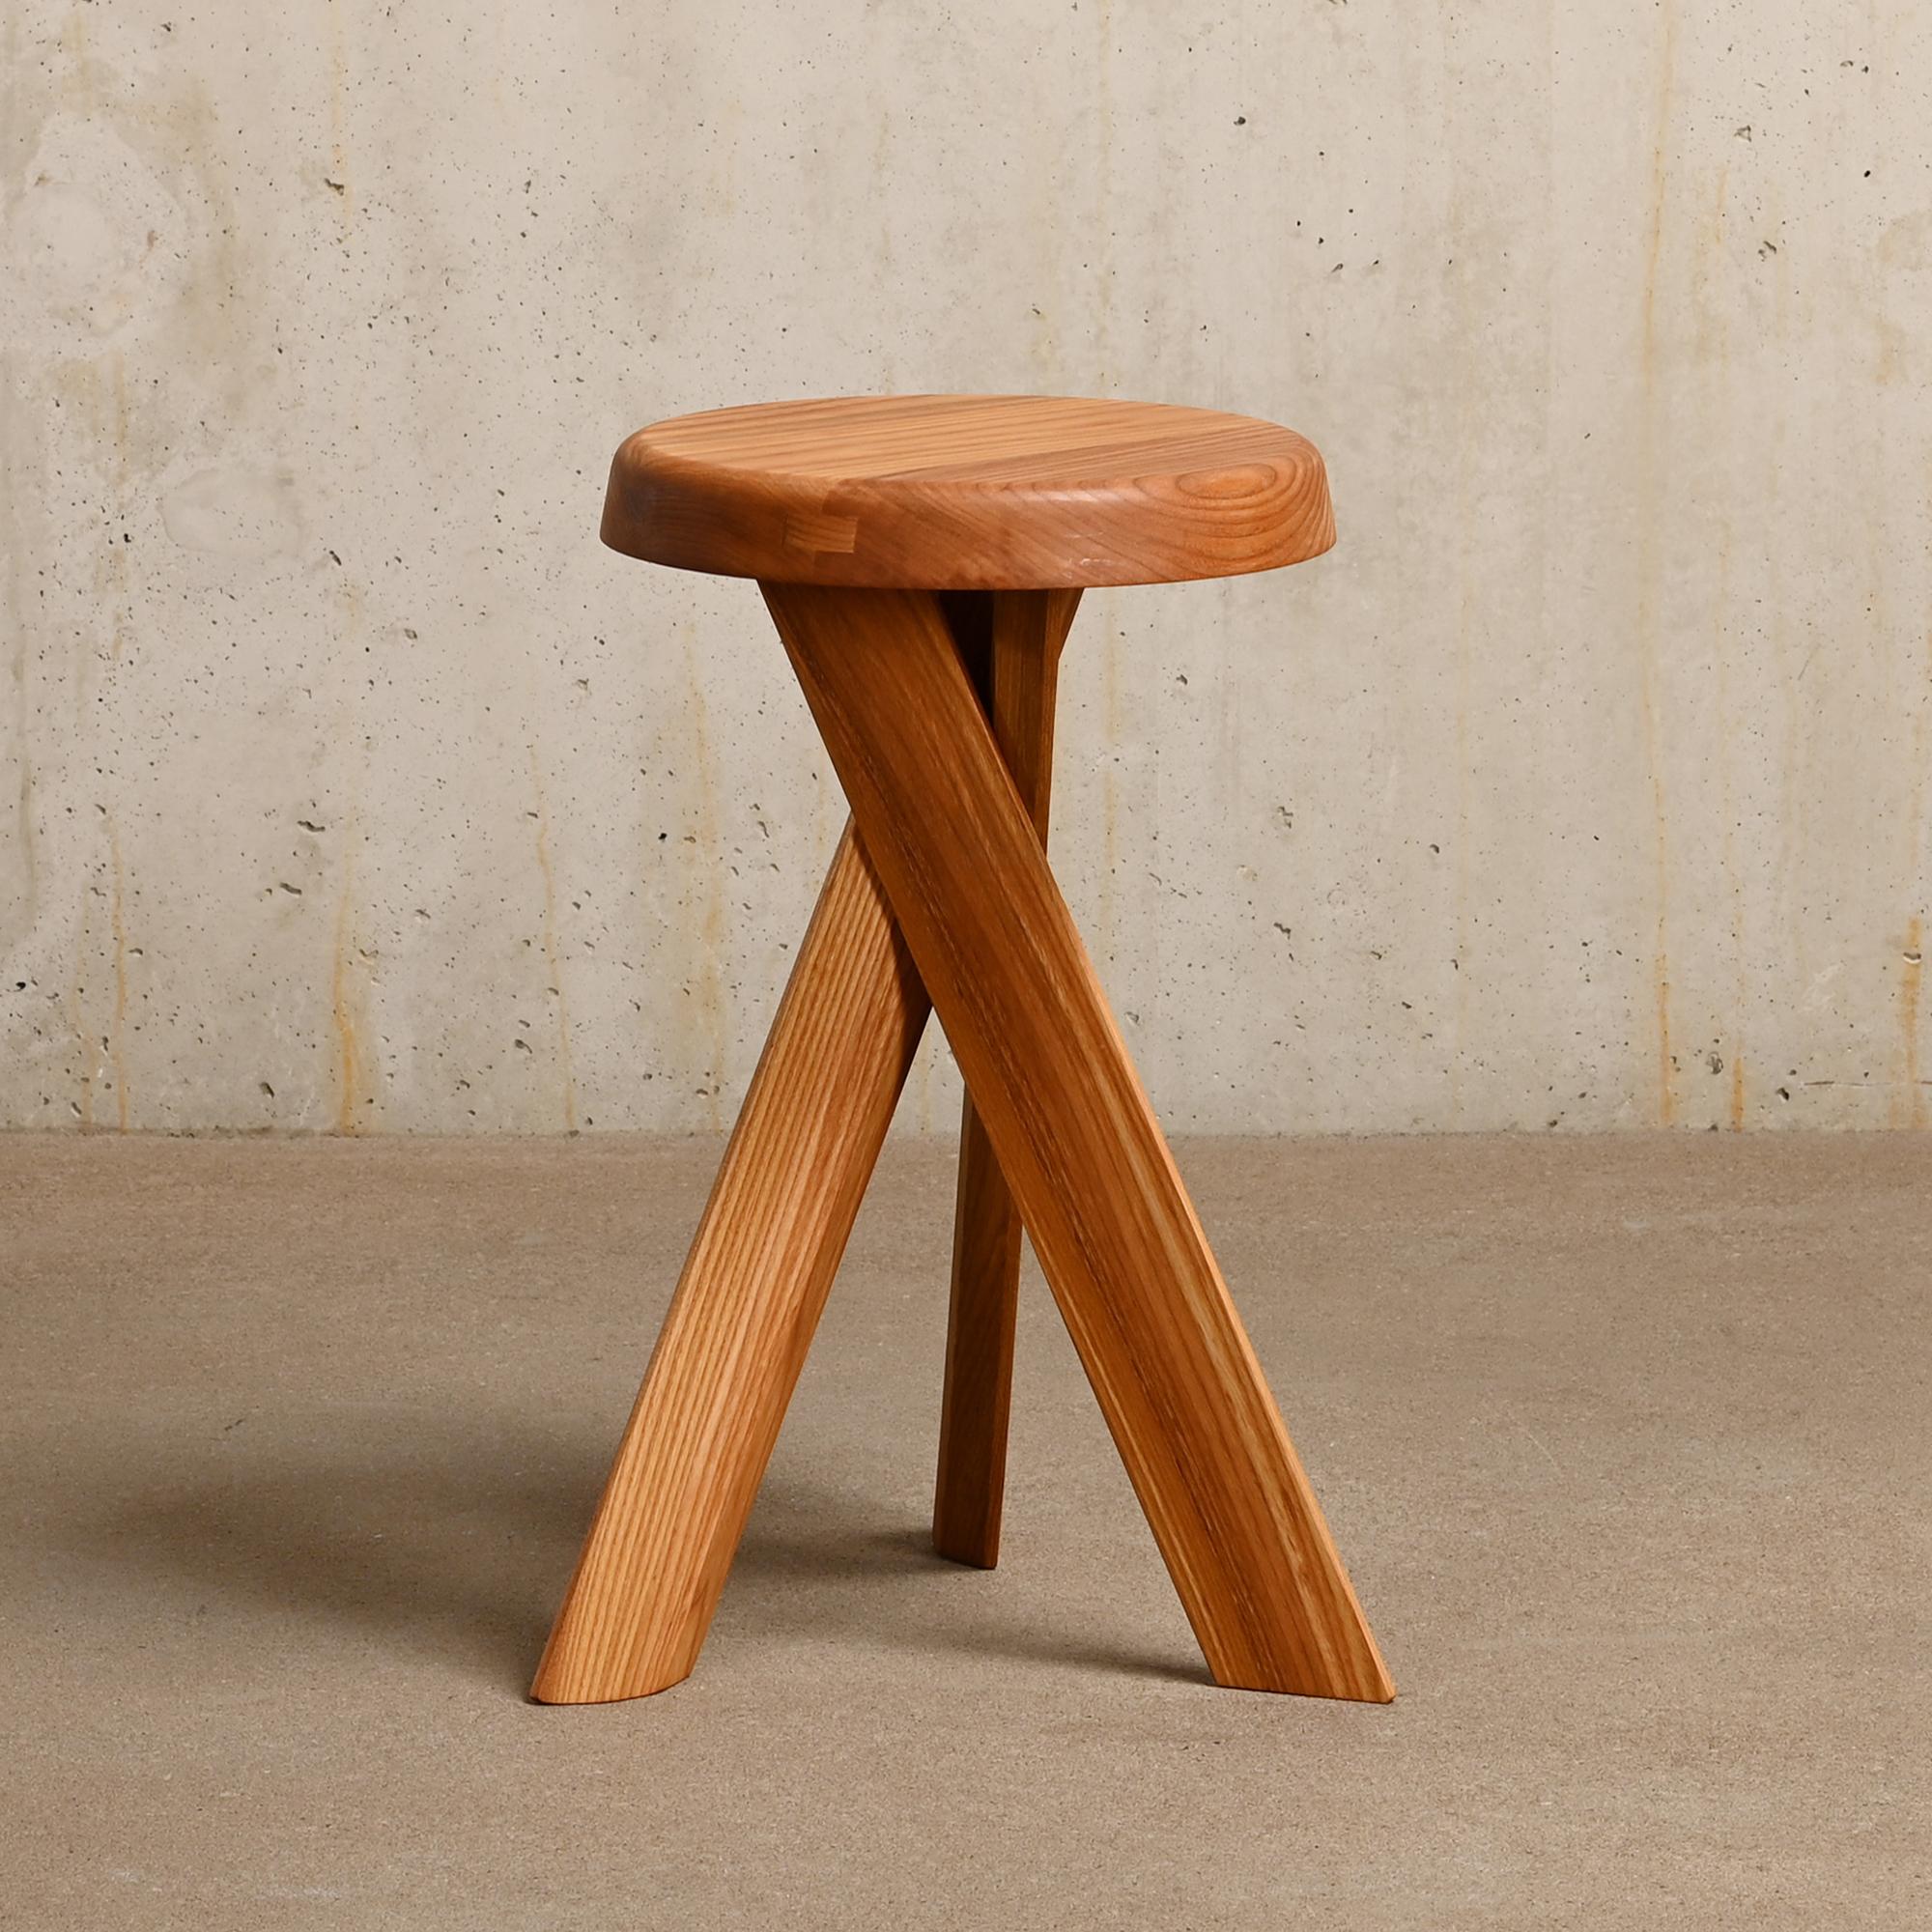 Mid-Century Modern Pierre Chapo Stool S31b in Solid Elm by Chapo Creation, France